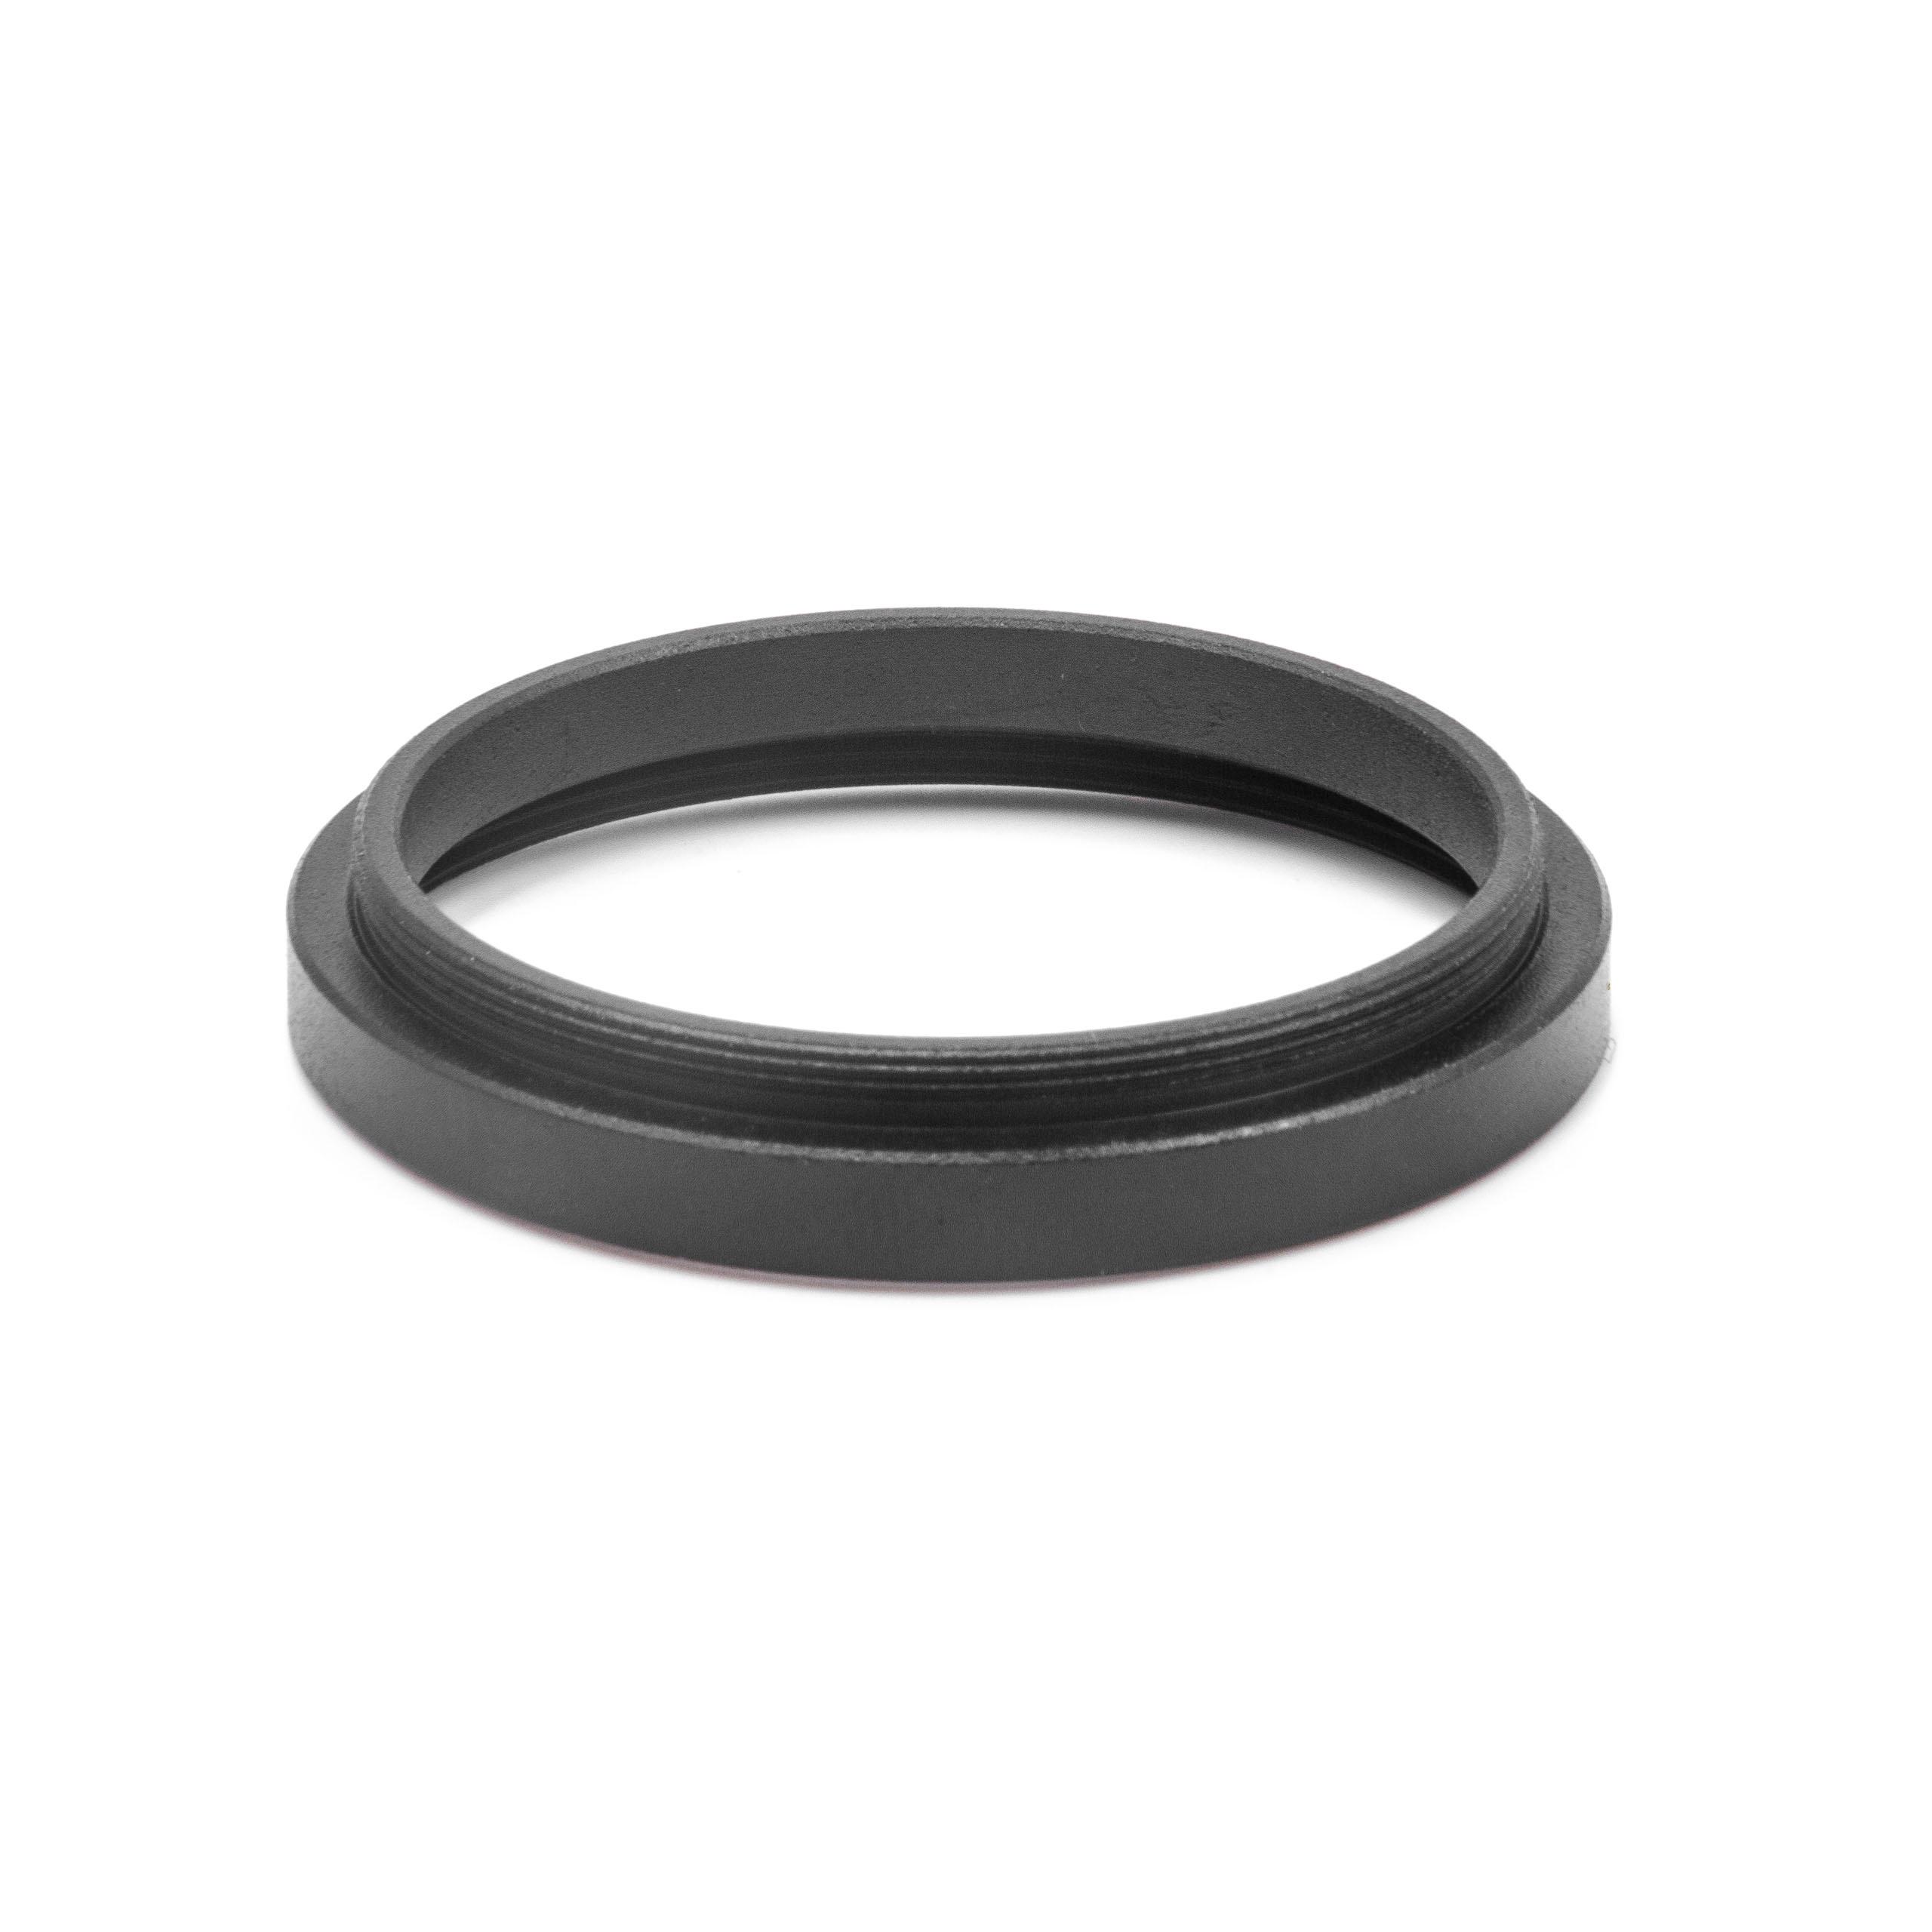 Step-Up Ring Adapter of 35.5 mm to 37 mmfor various Camera Lens - Filter Adapter